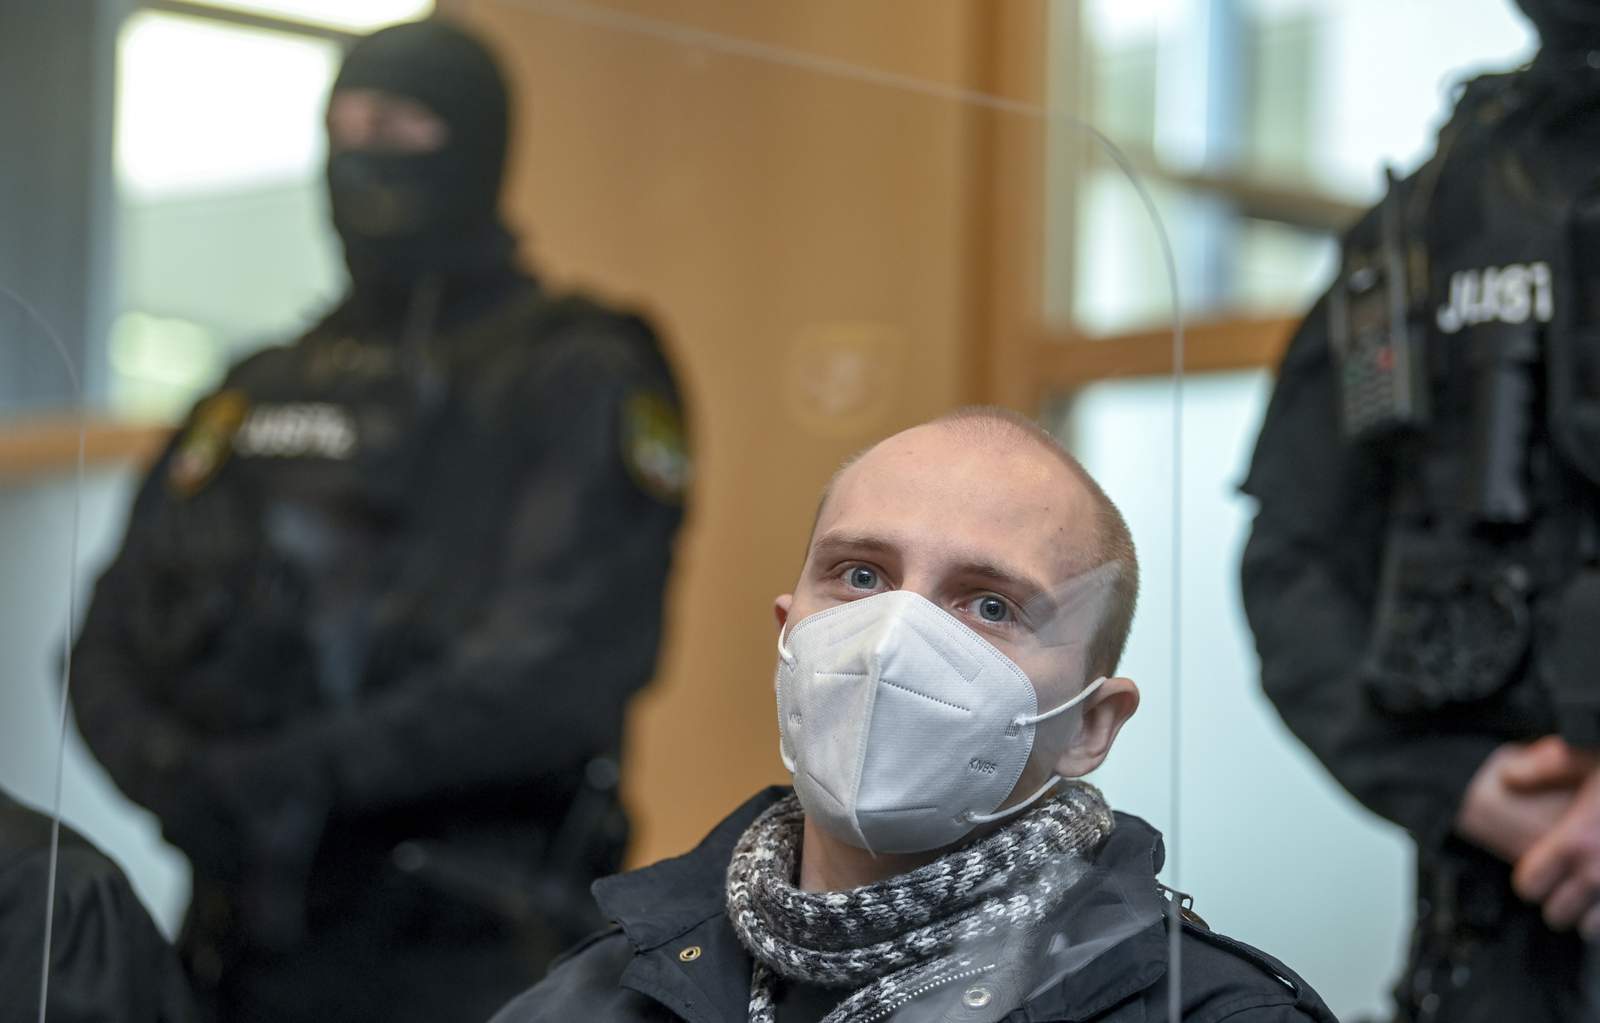 German extremist convicted of murder after synagogue attack